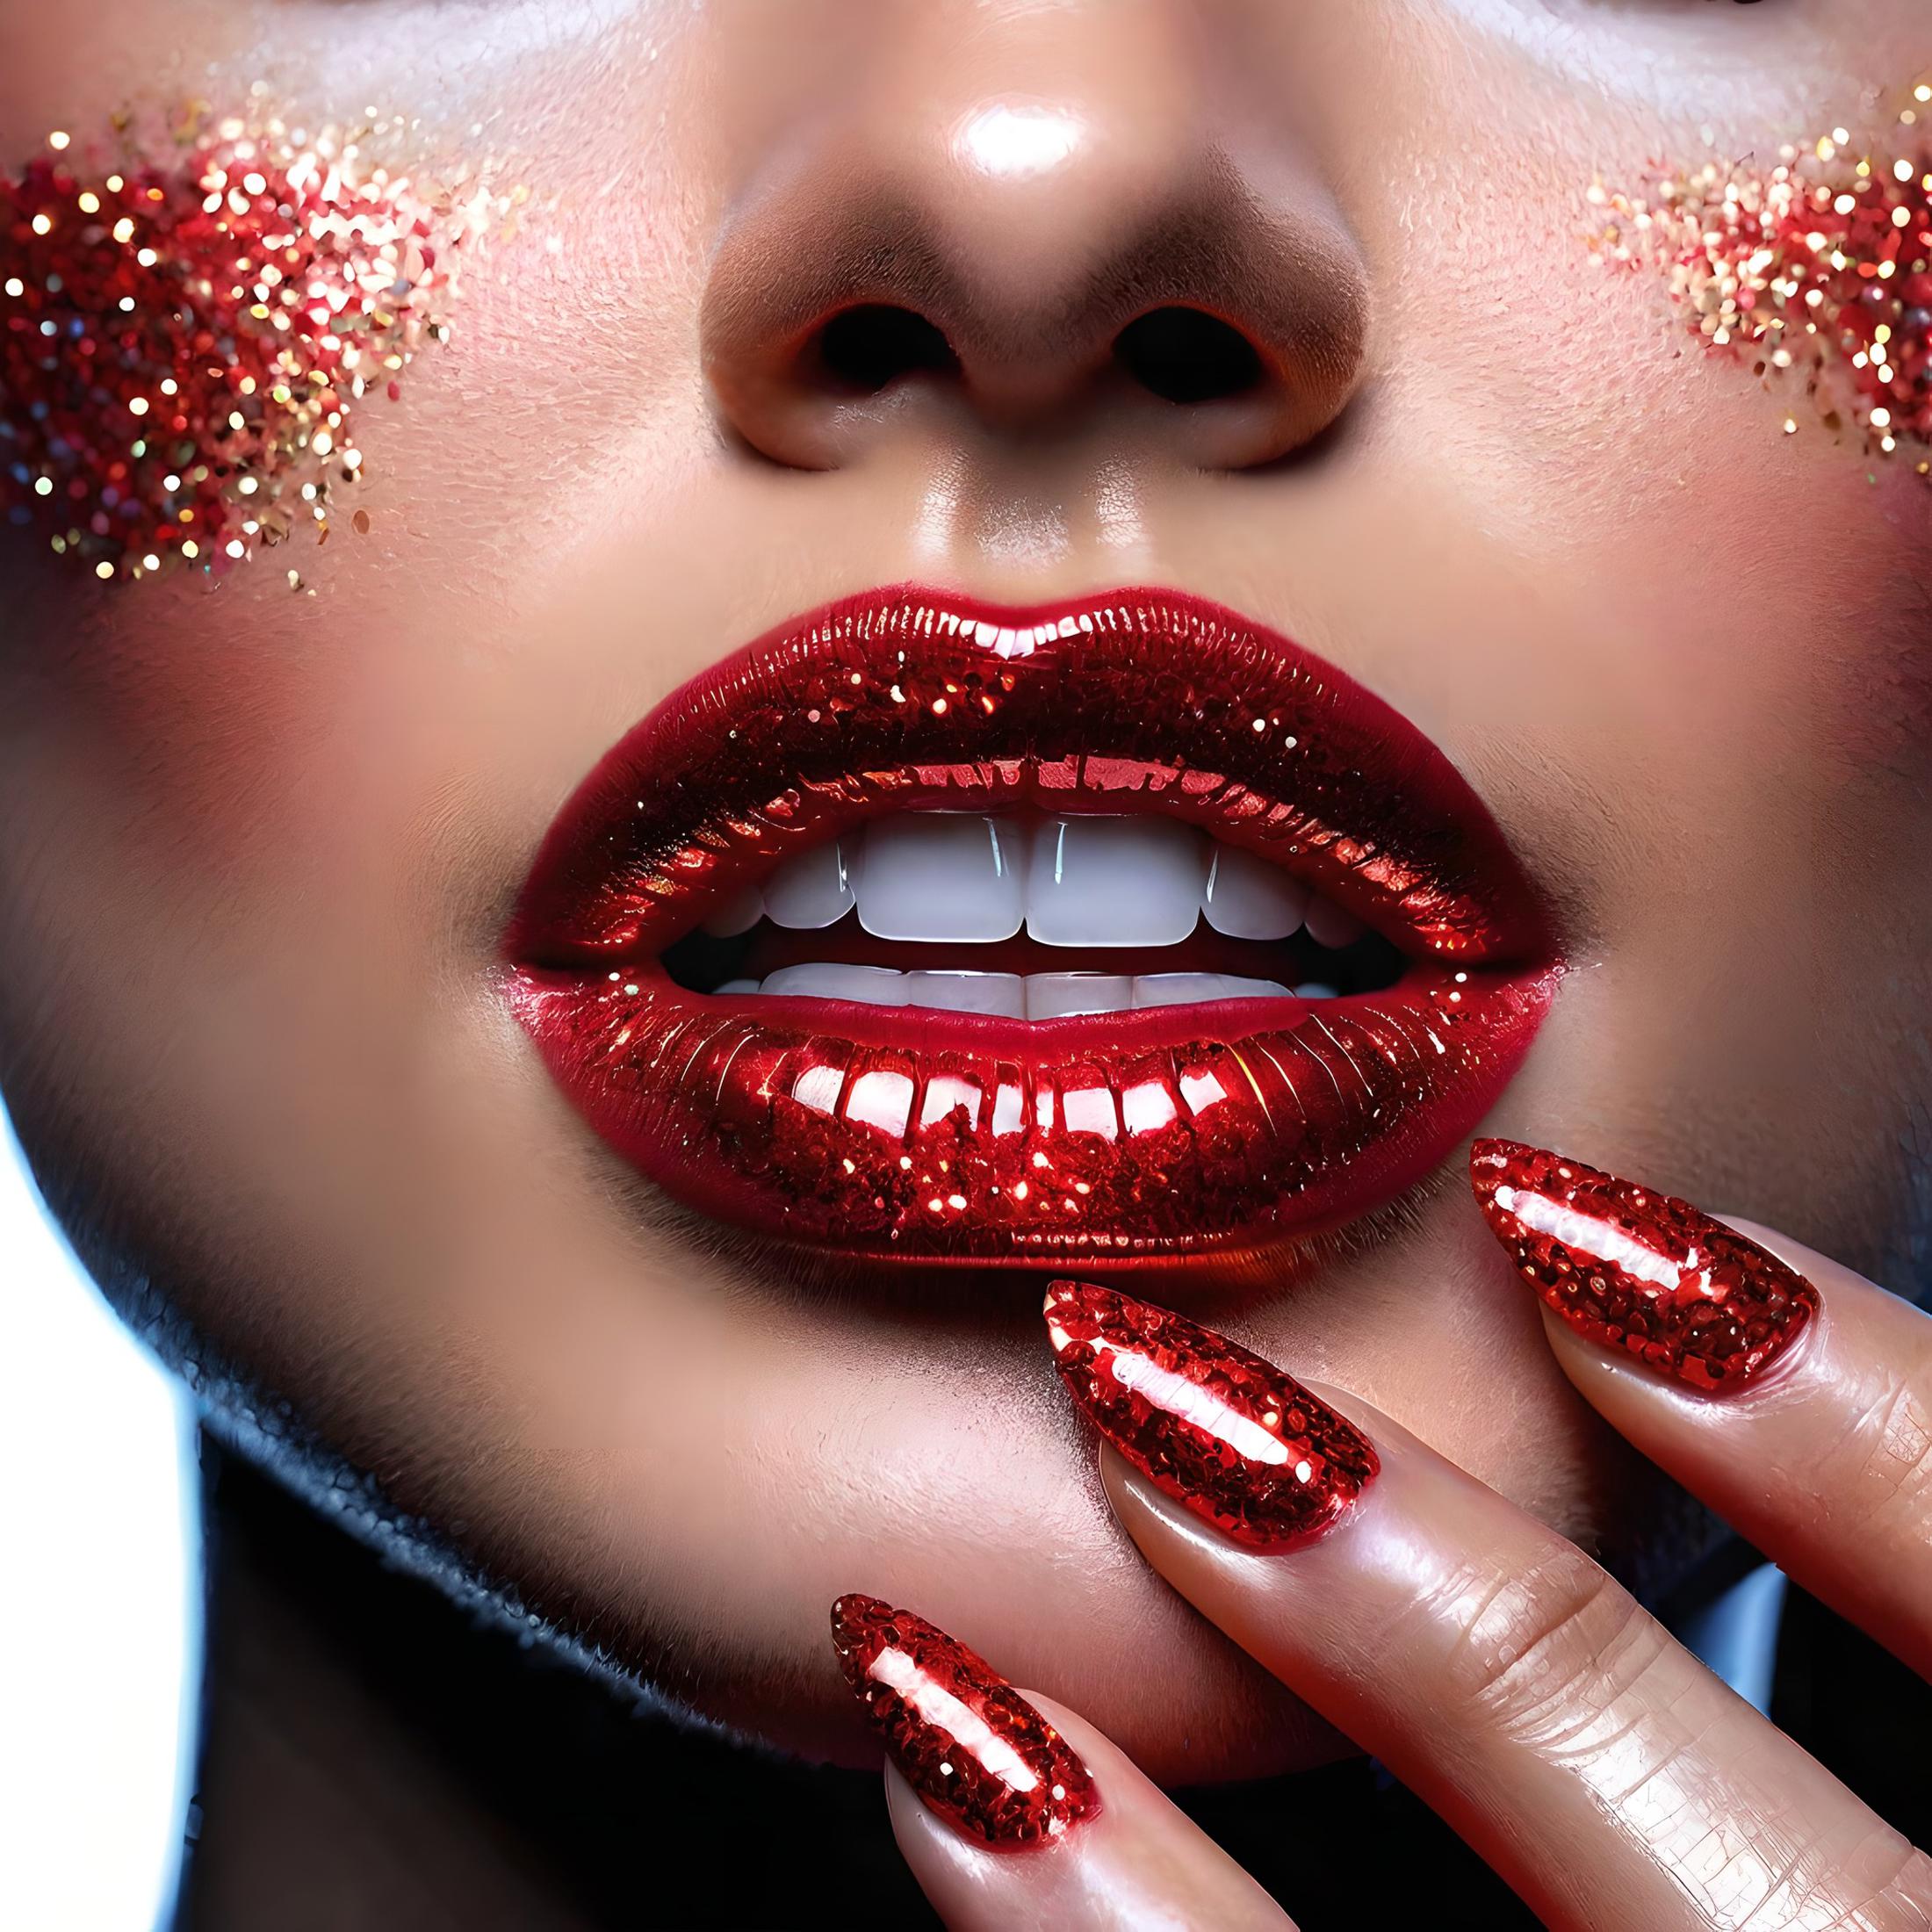 A woman with red lipstick and red glitter on her face.